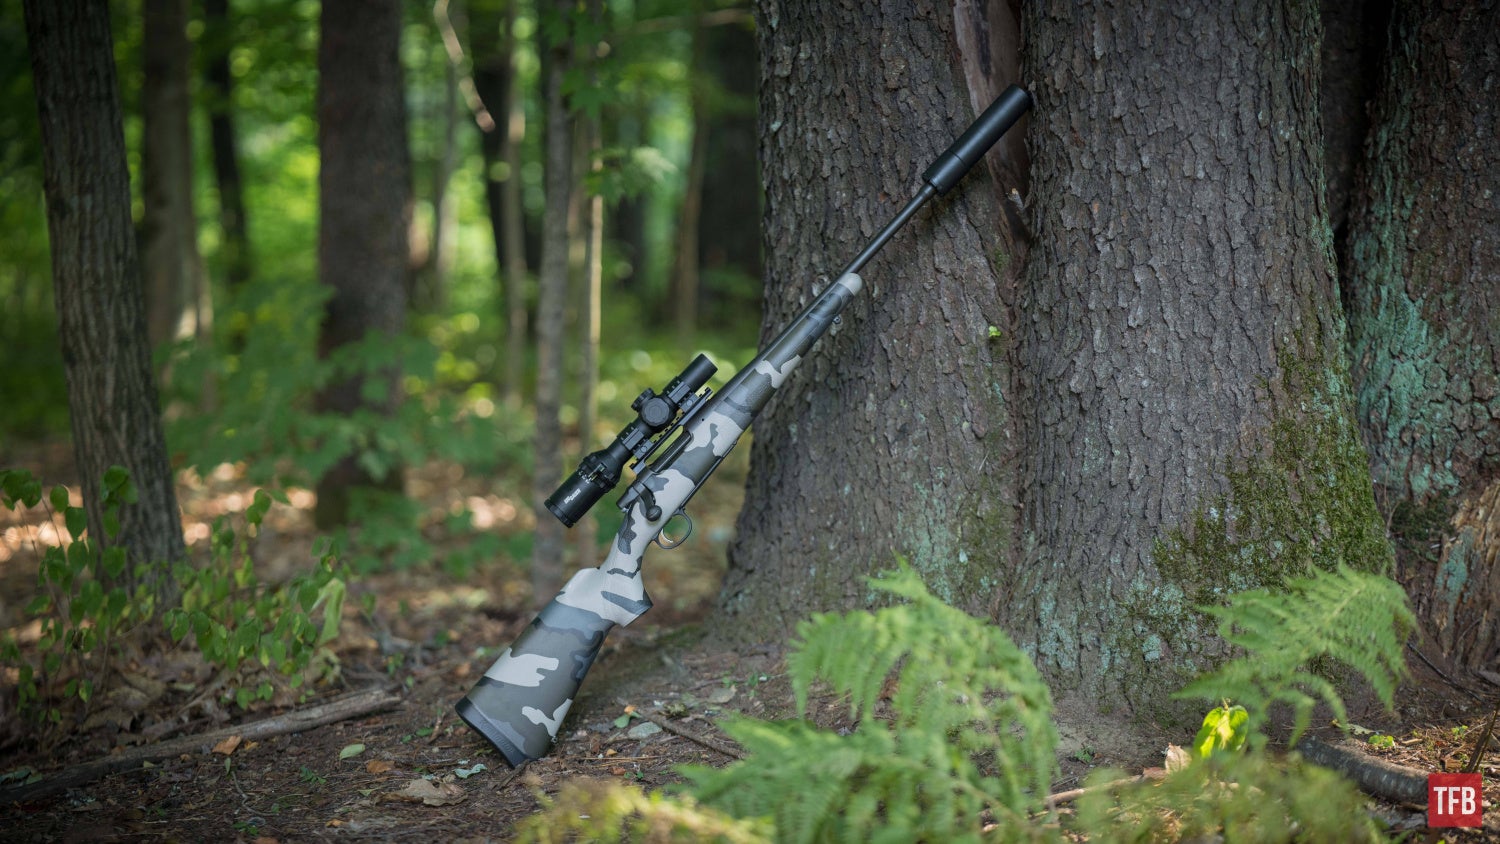 SILENCER SATURDAY #241: Be Very Quiet, We’re Hunting With the SilencerCo Harvester Evo 